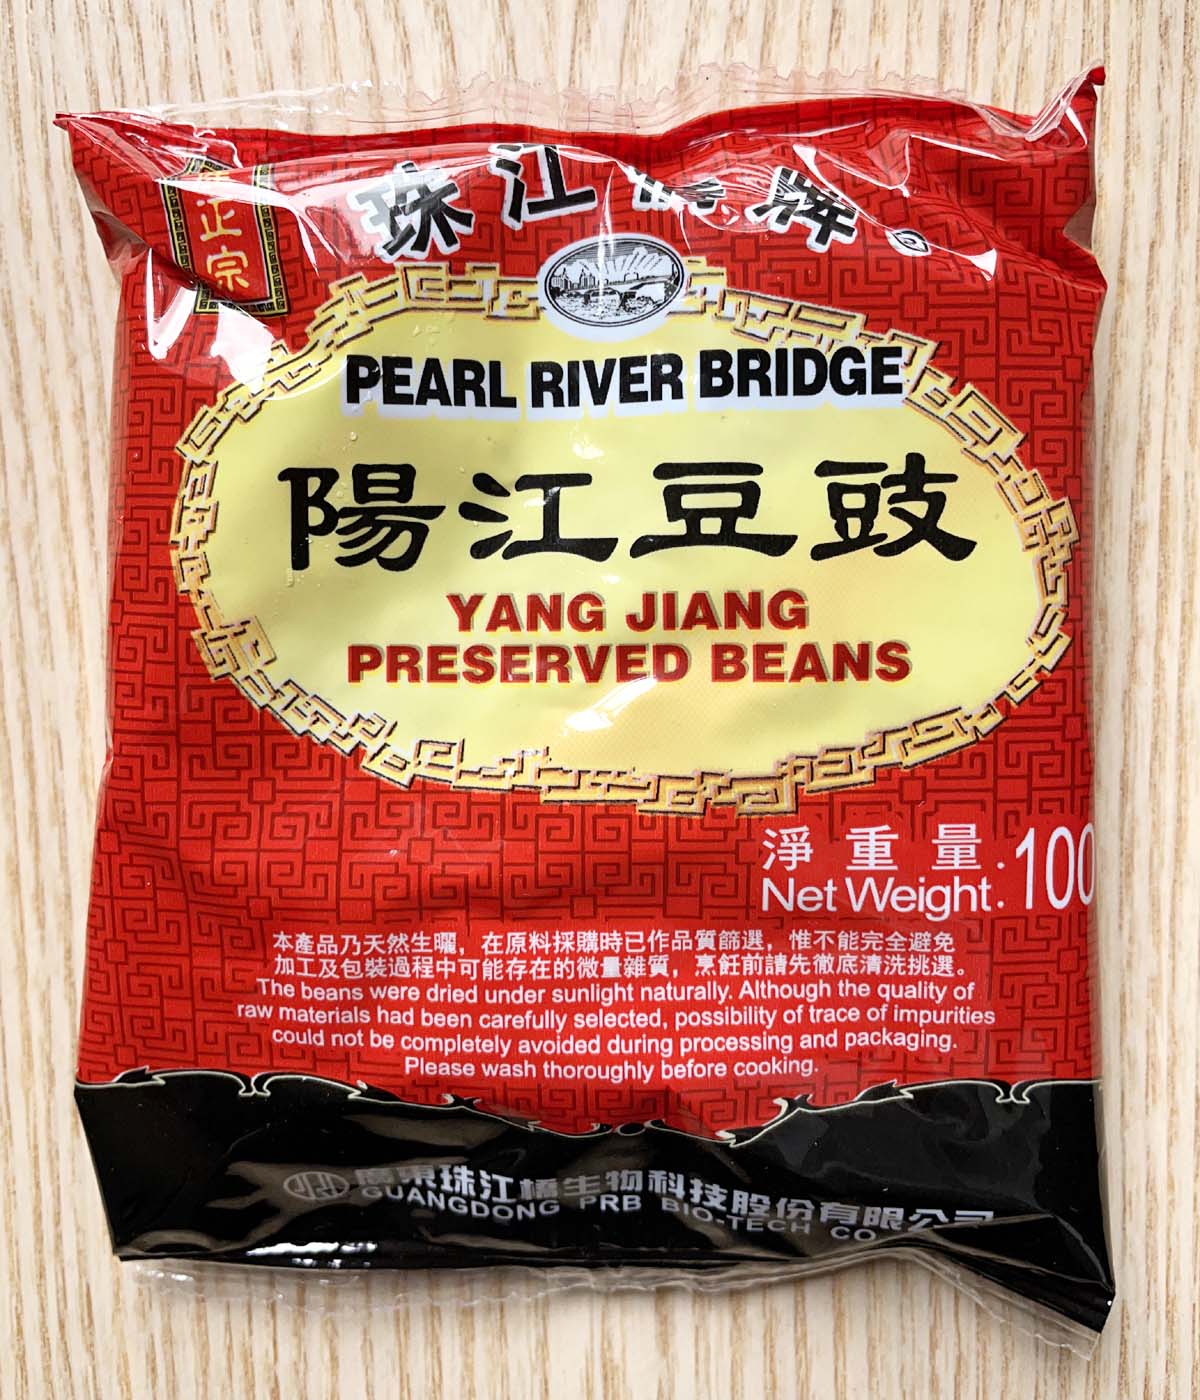 A square red, black, and yellow package of preserved beans.